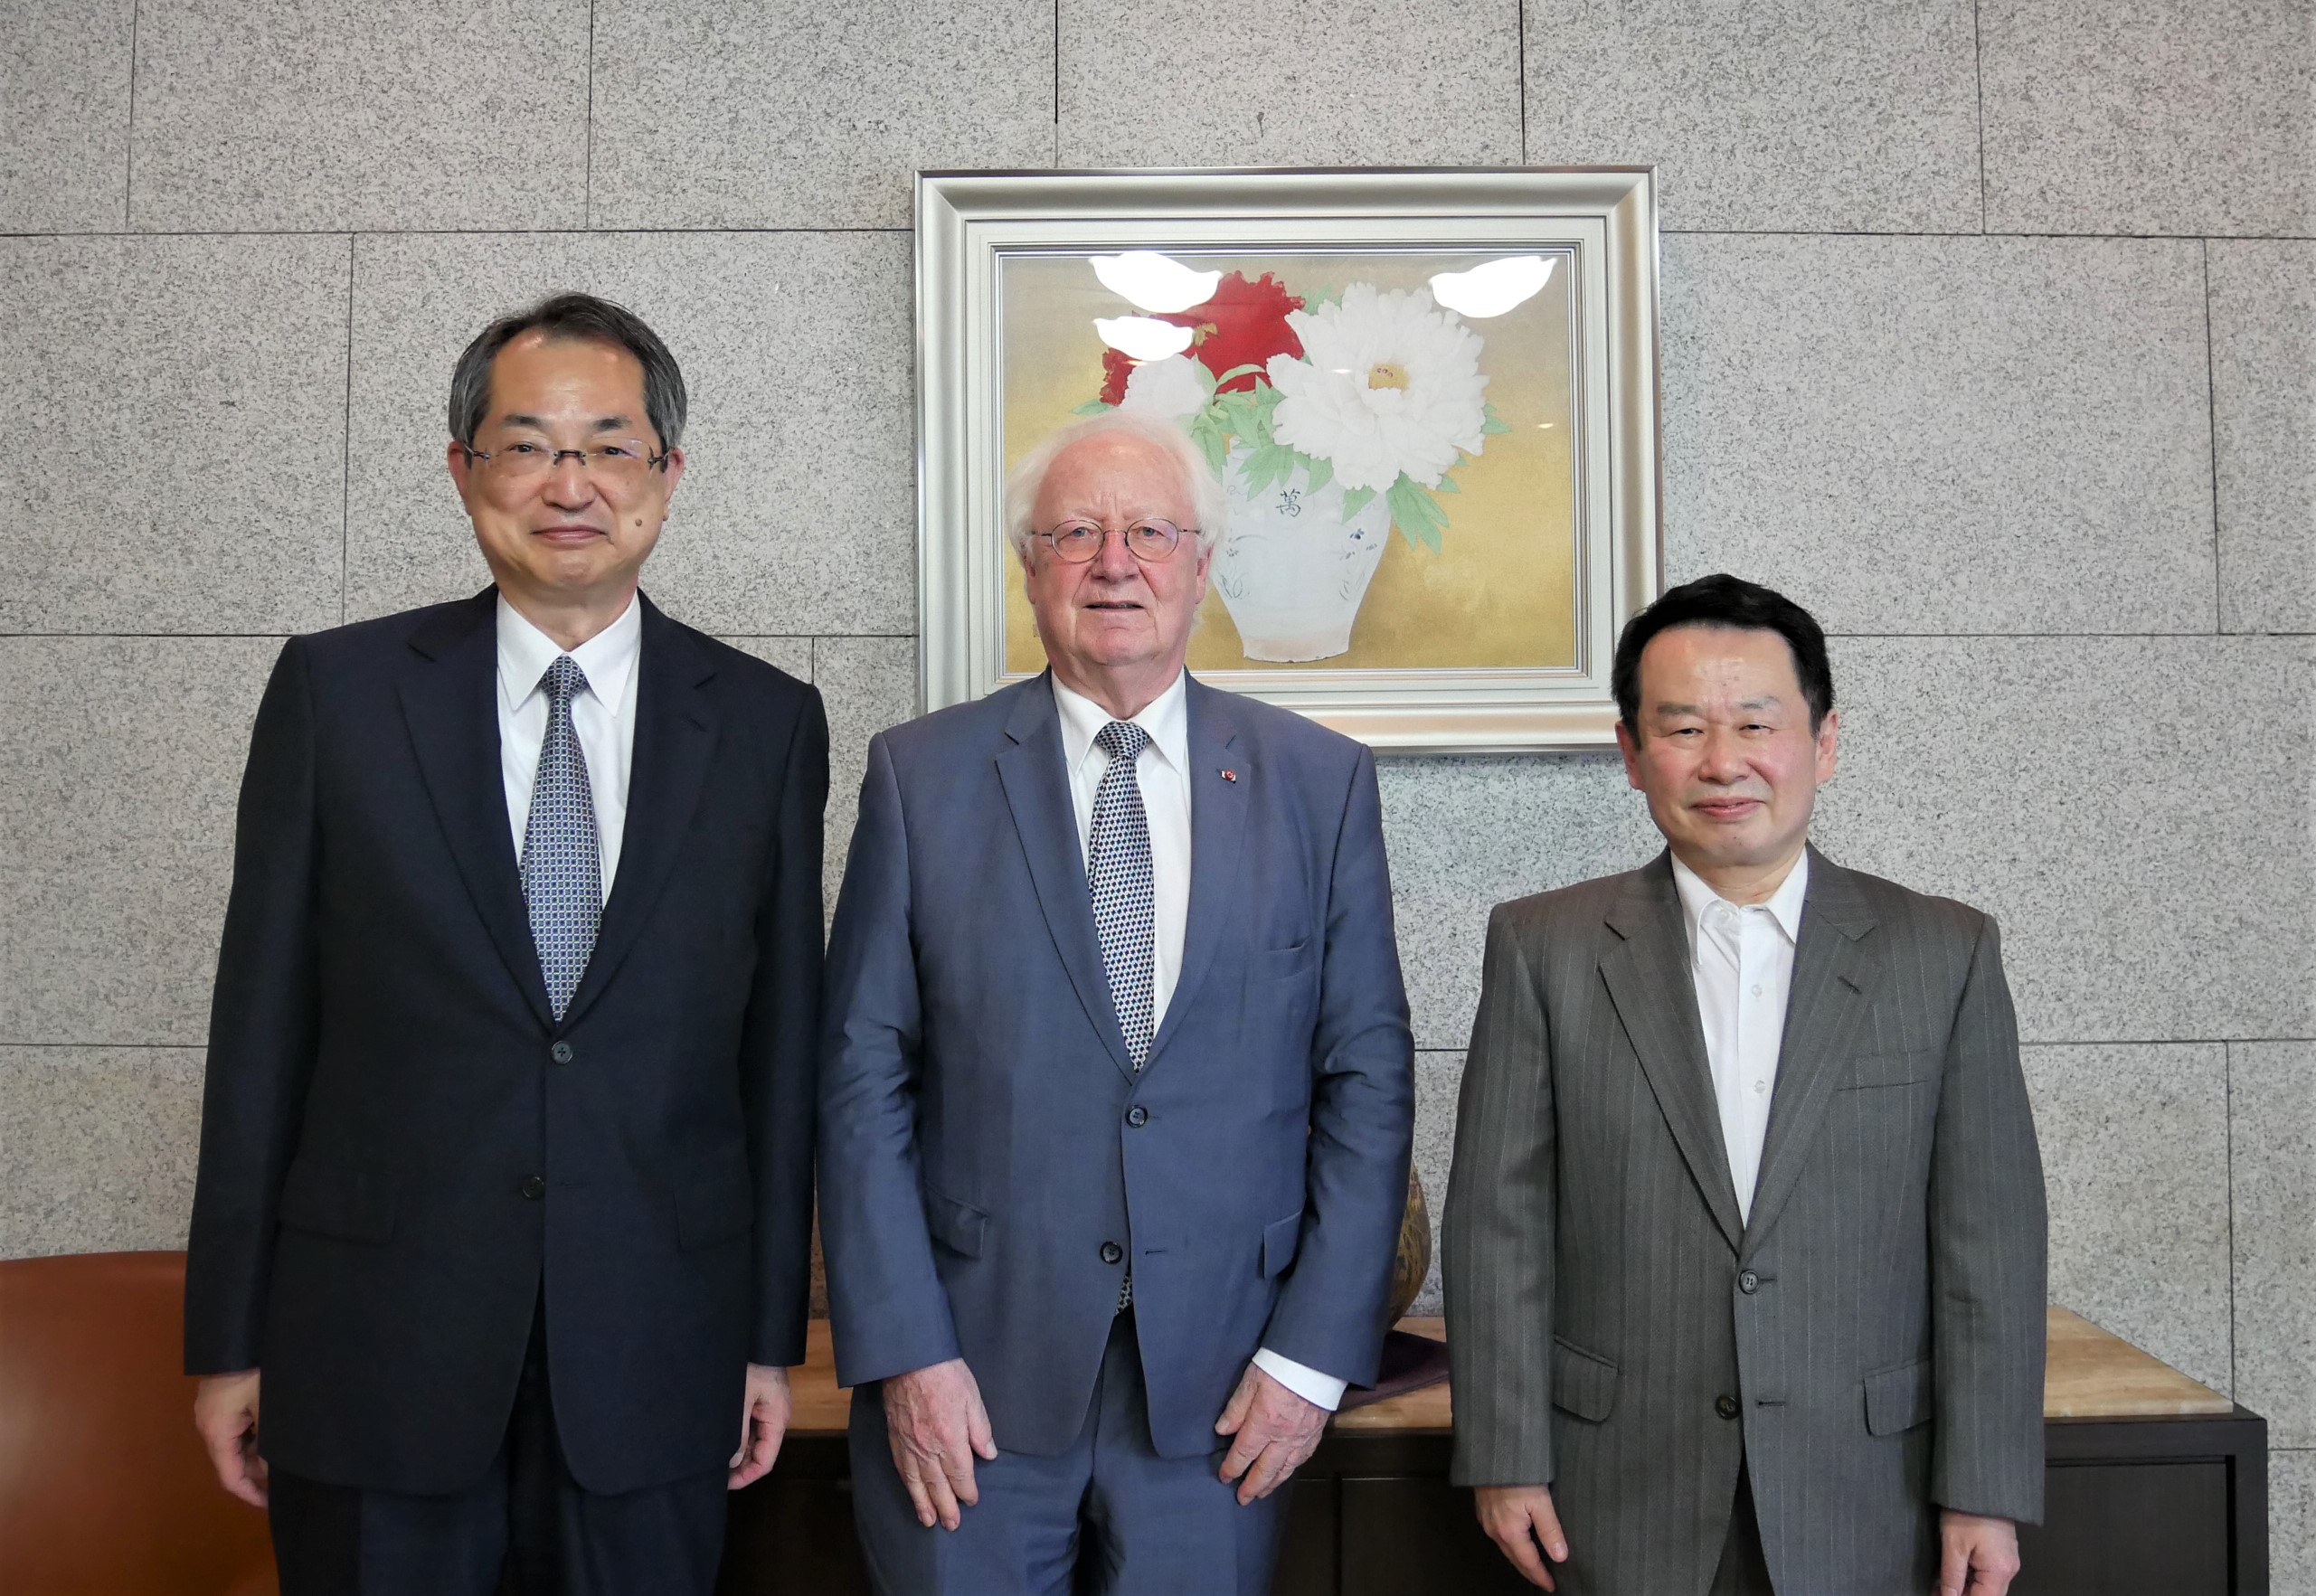 picture of Dr. Jan Groteer, Chief Justice OTANI Naoto and Justice HAYASHI Michiharu